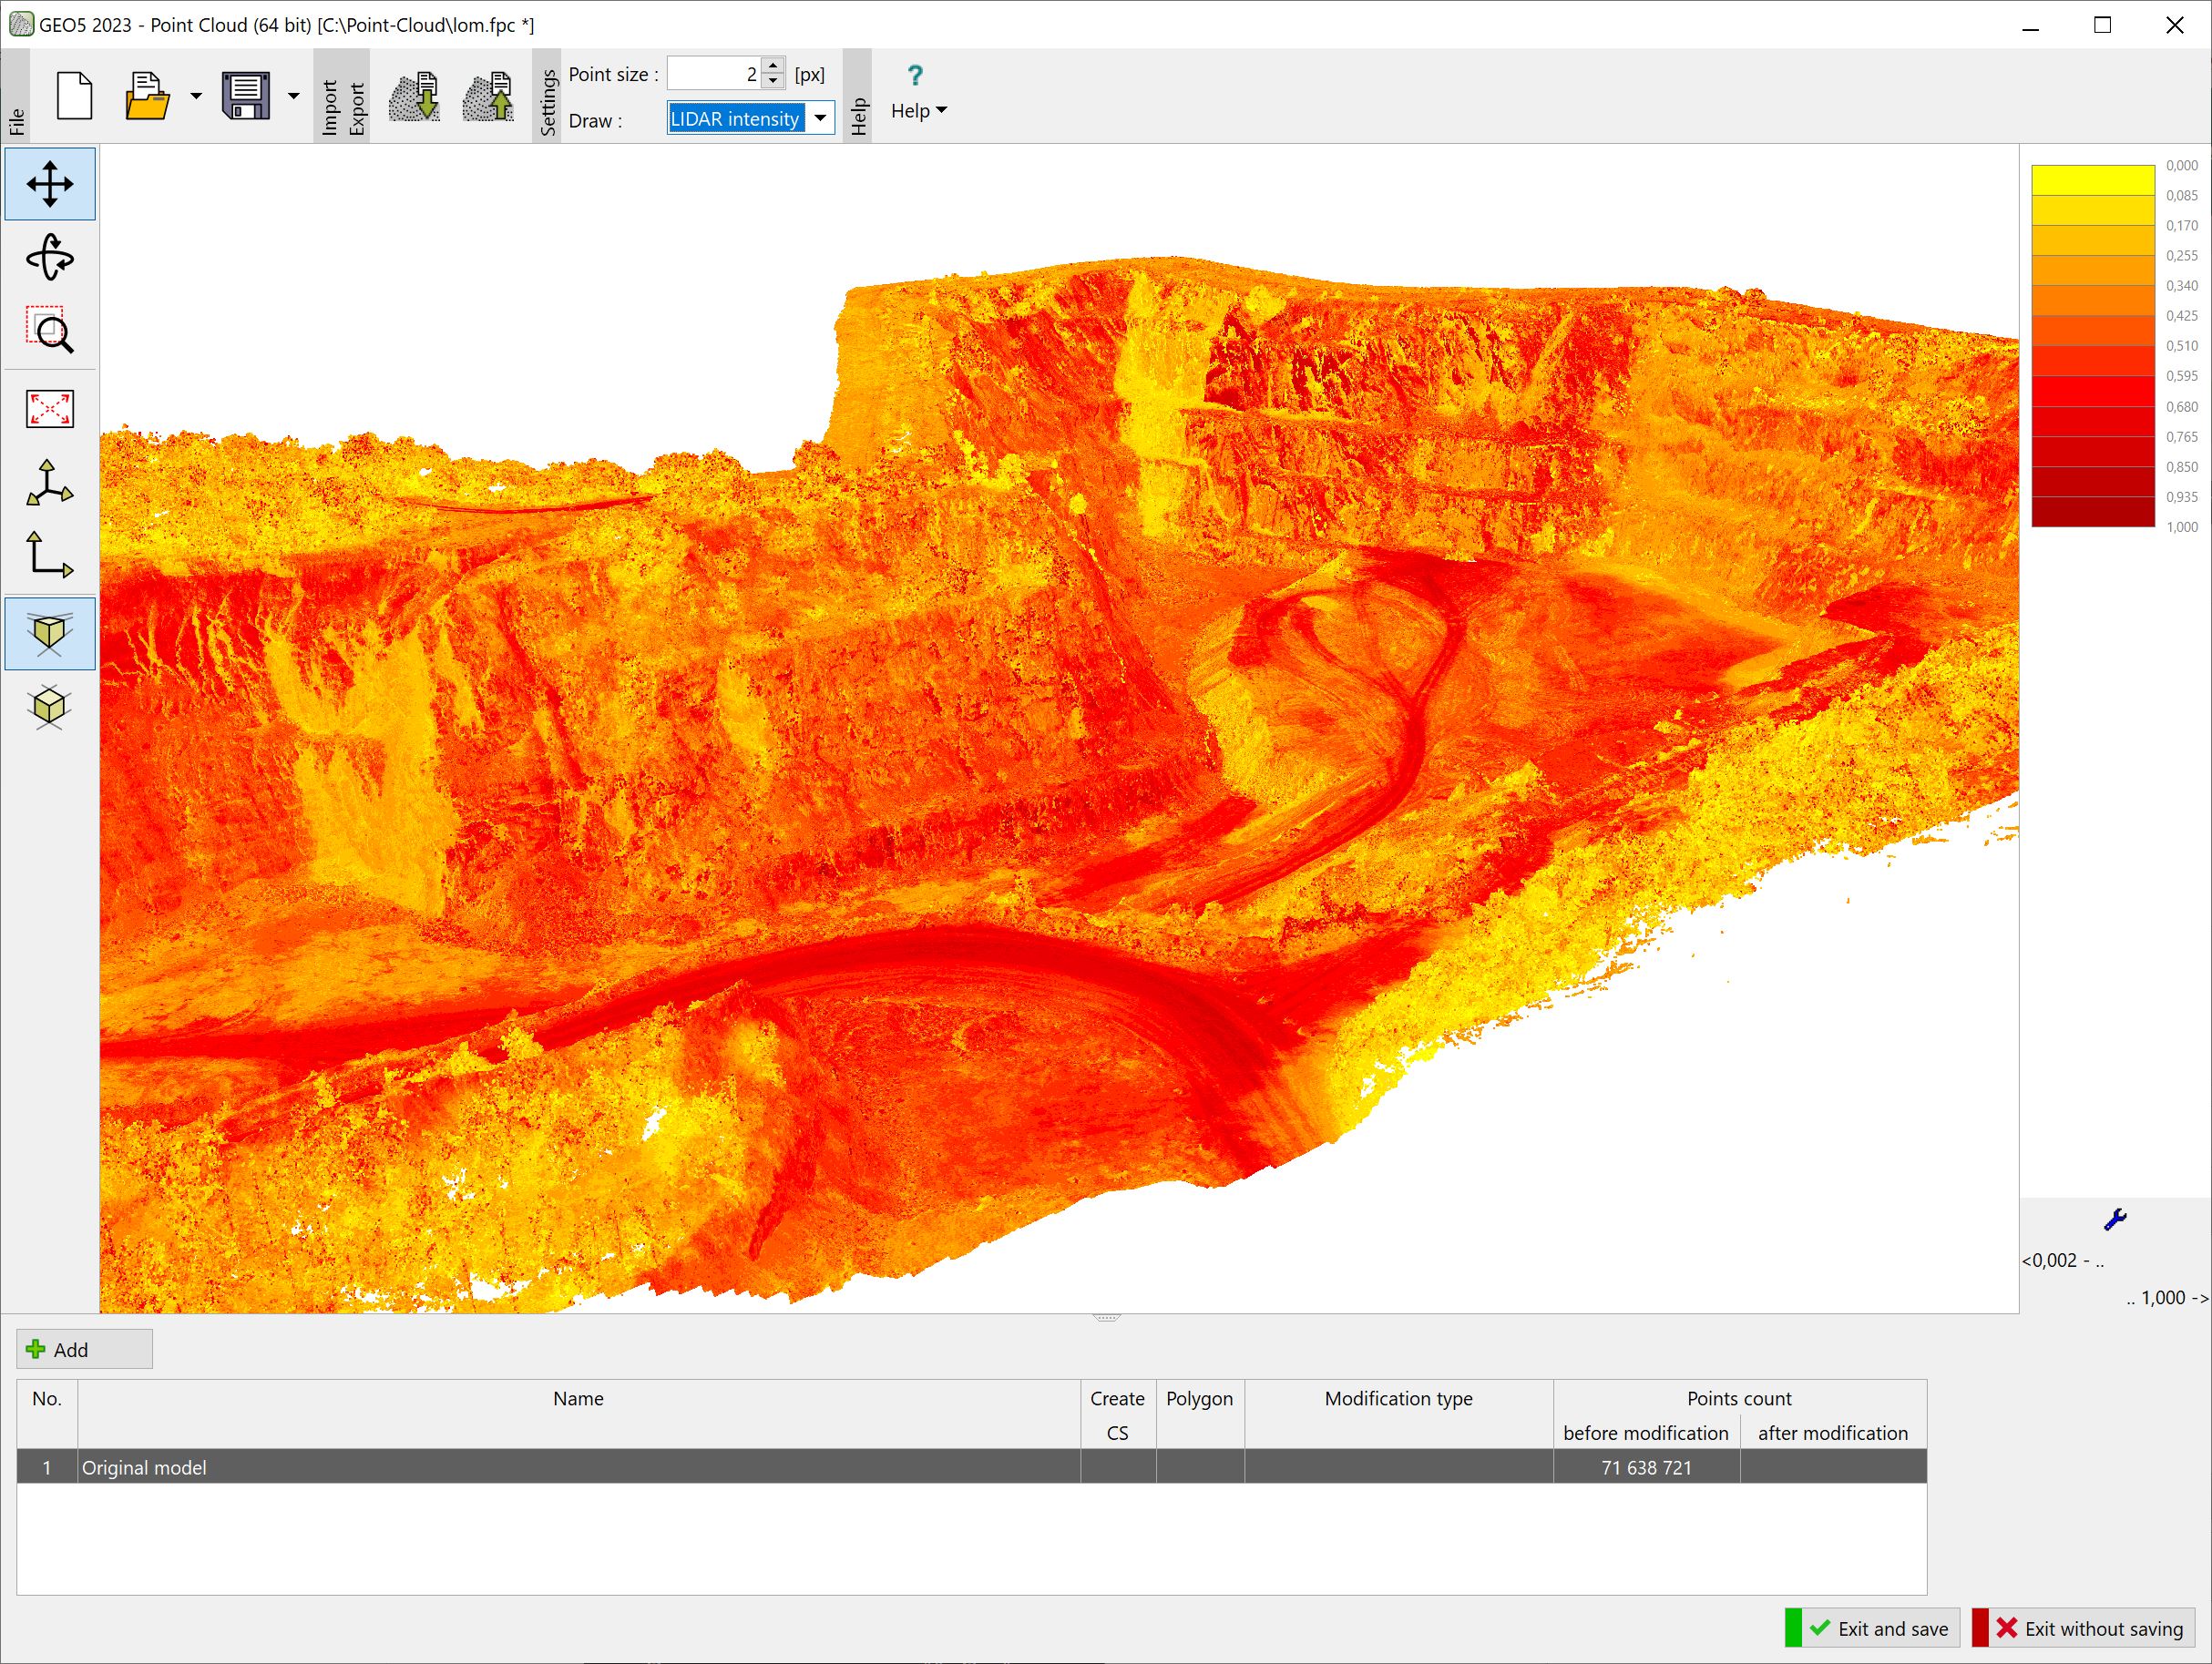 Point Cloud : Intensity of reflected rays from LIDAR